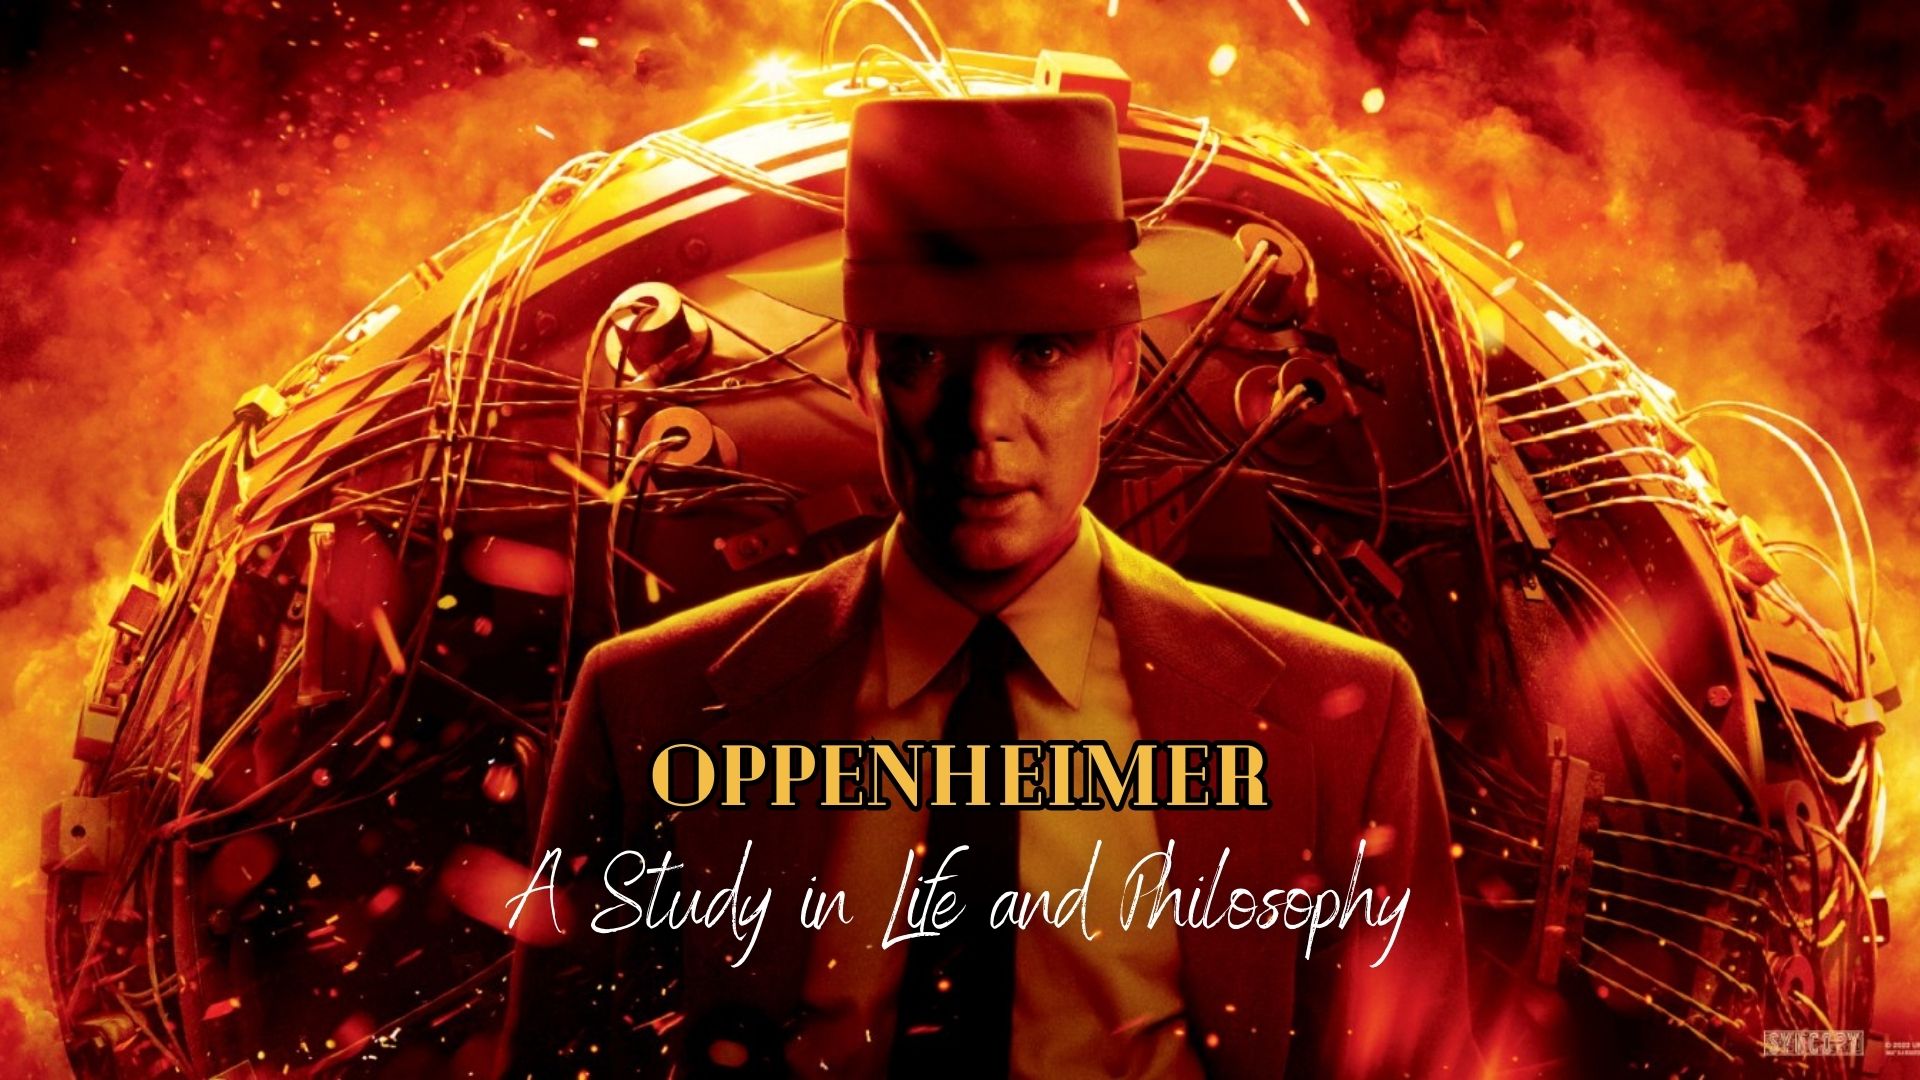 Oppenheimer - A Study in Life and Philosophy - The Verandah Club